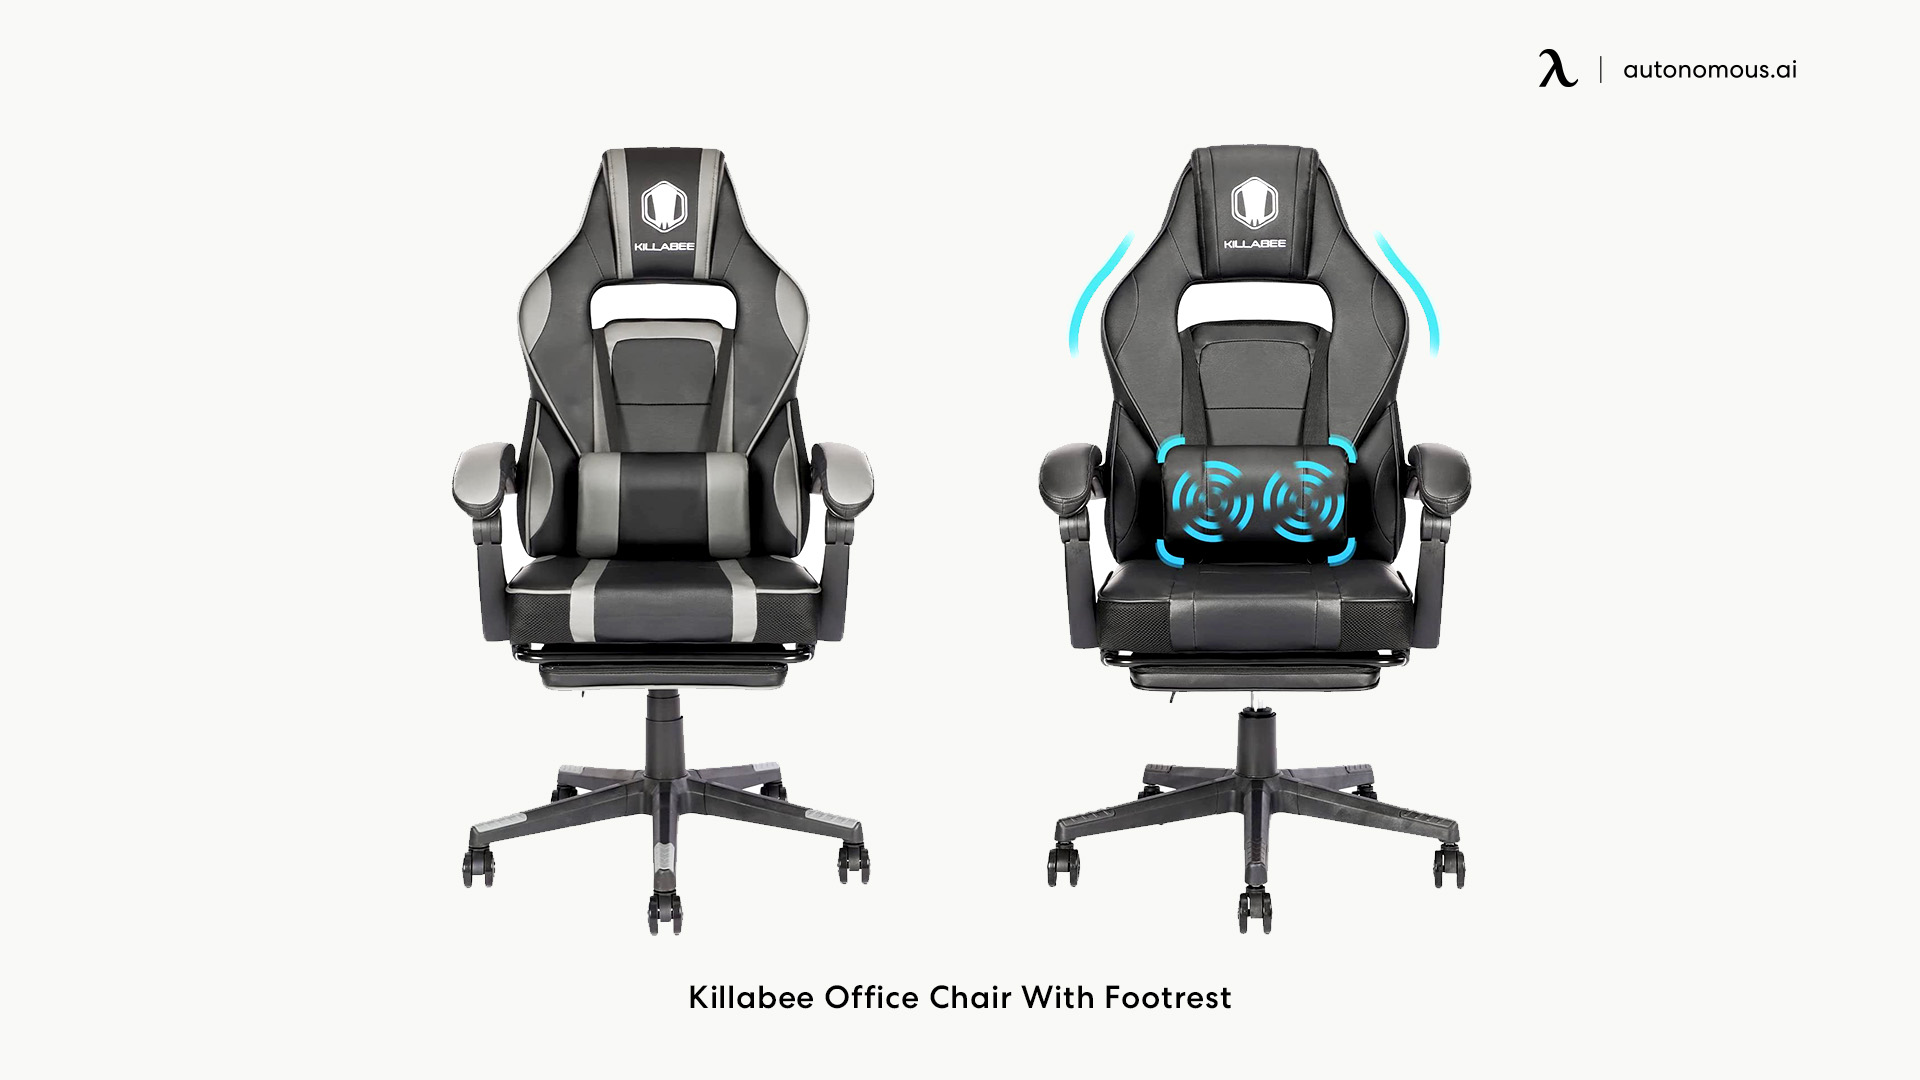 Killabee Office Chair With Footrest